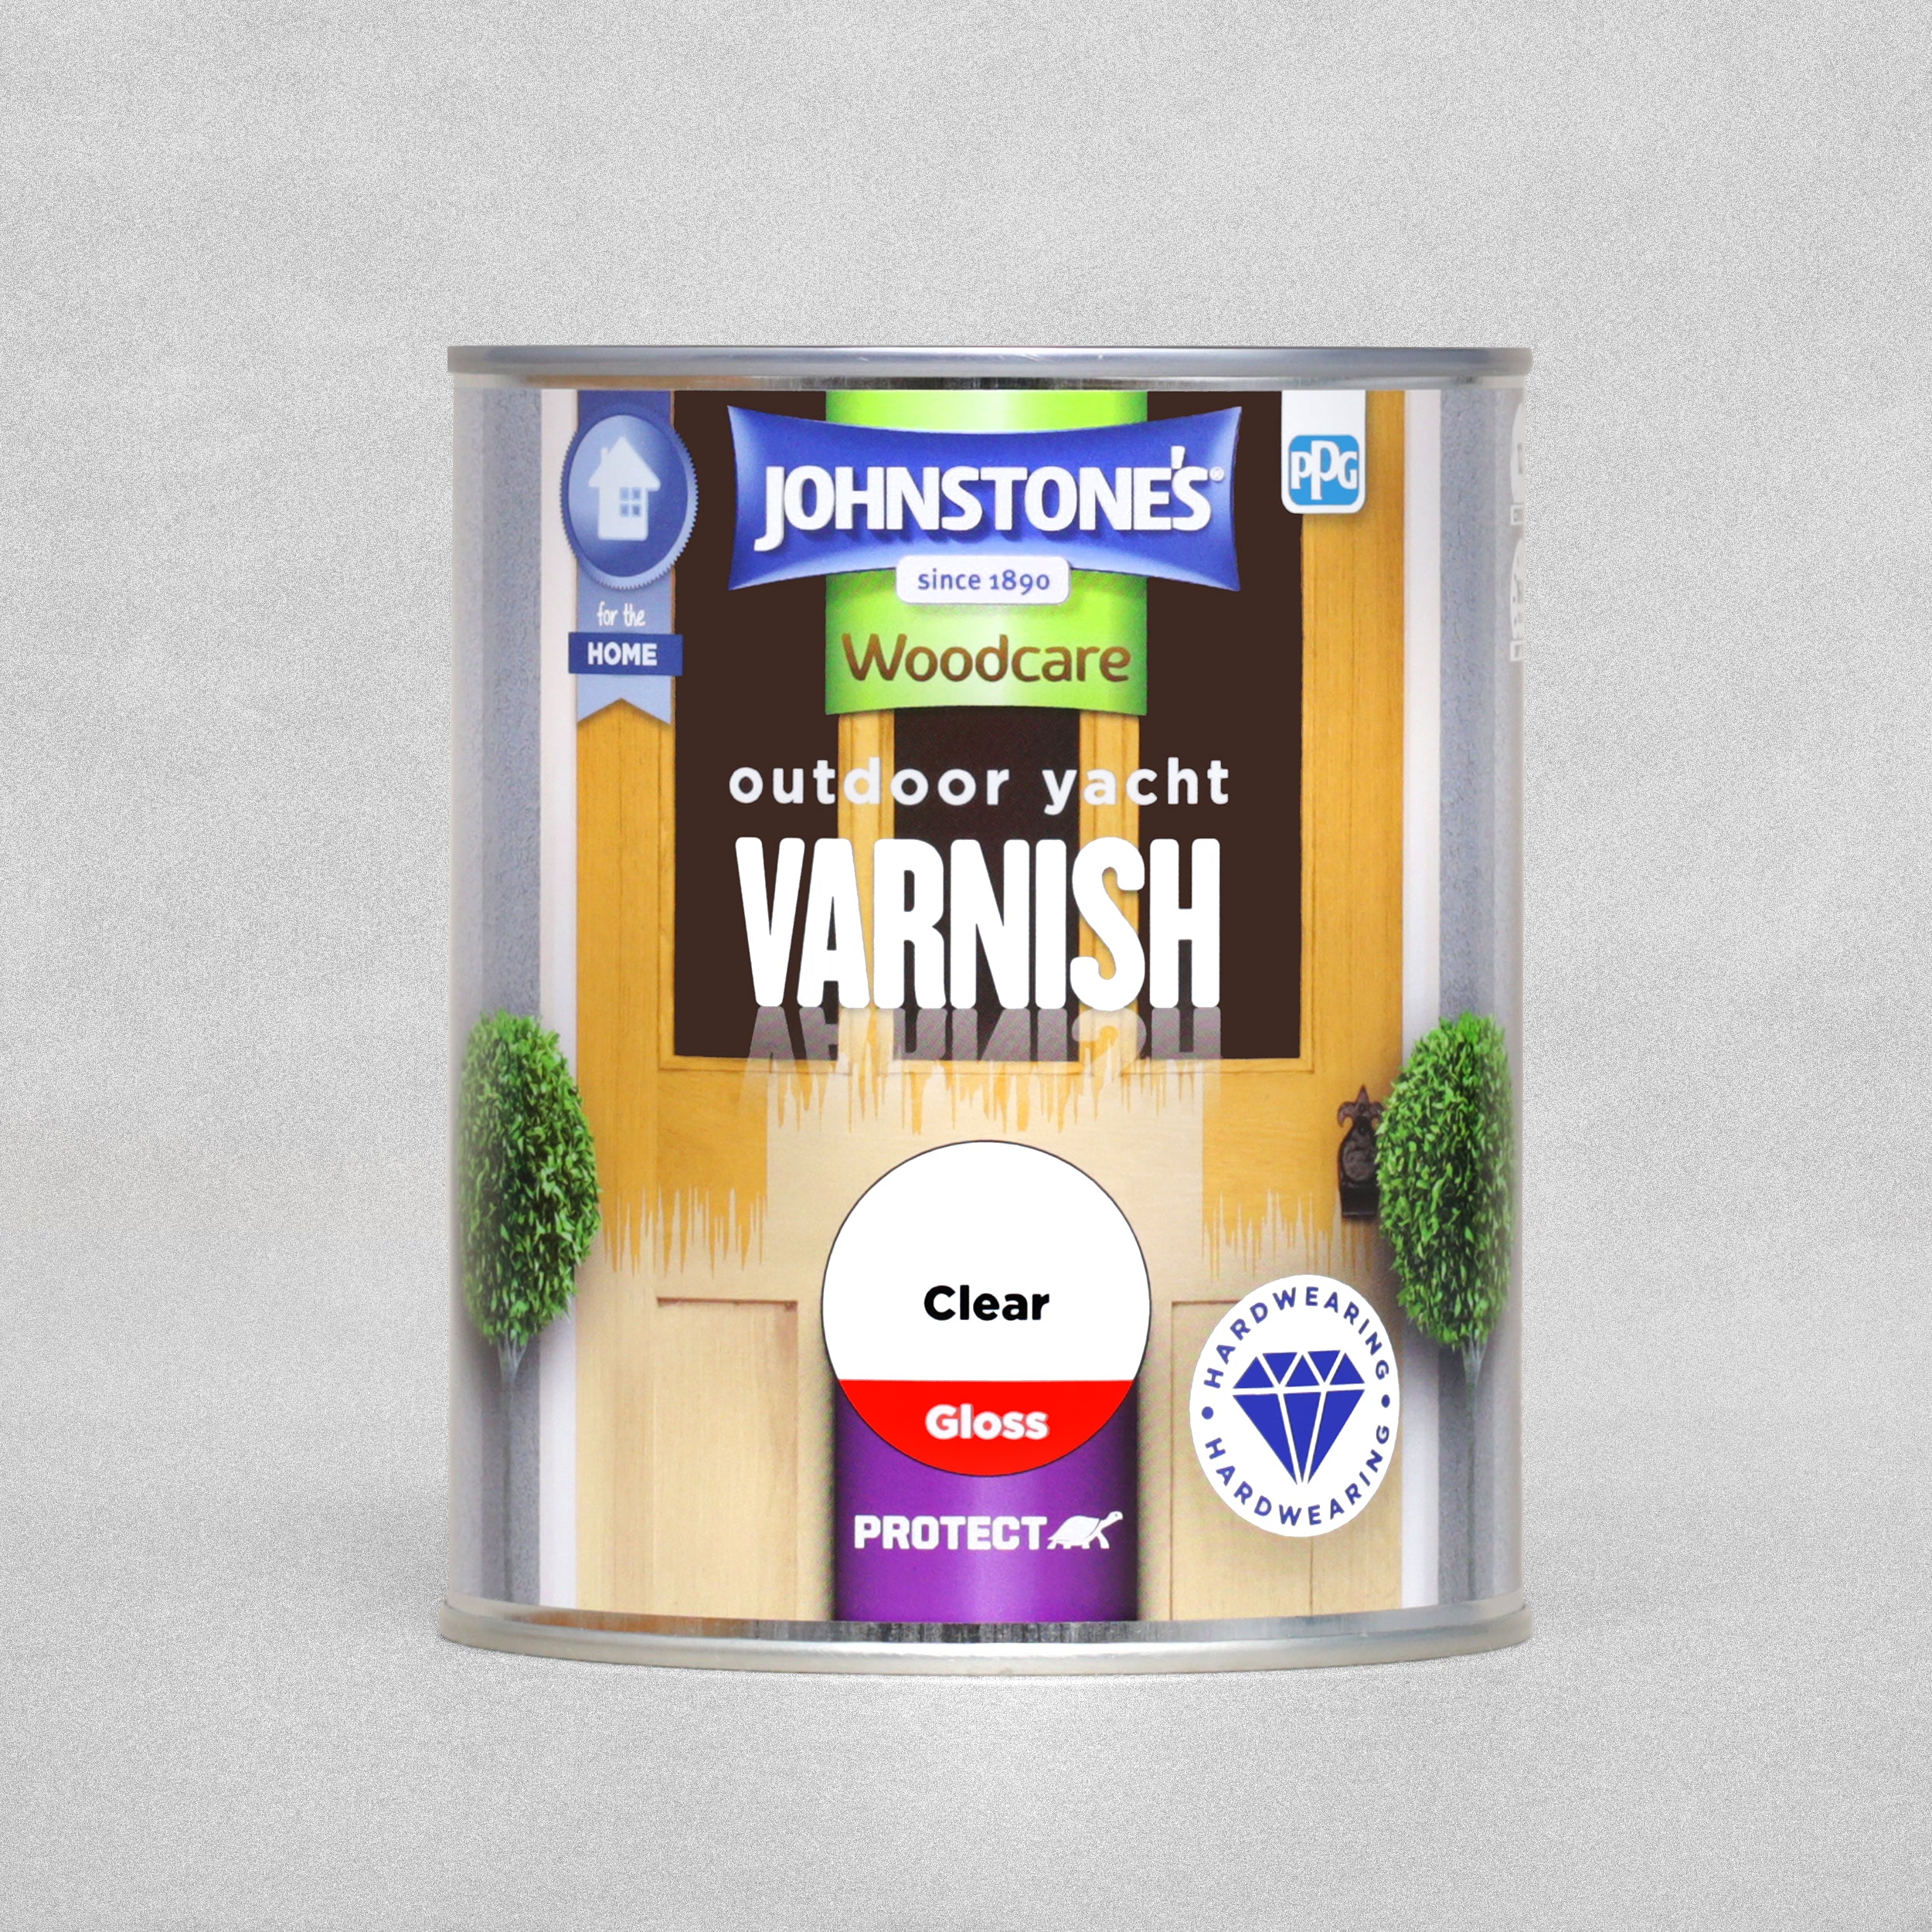 Johnstone's Woodcare Outdoor Yacht Clear Gloss Varnish - 750ml